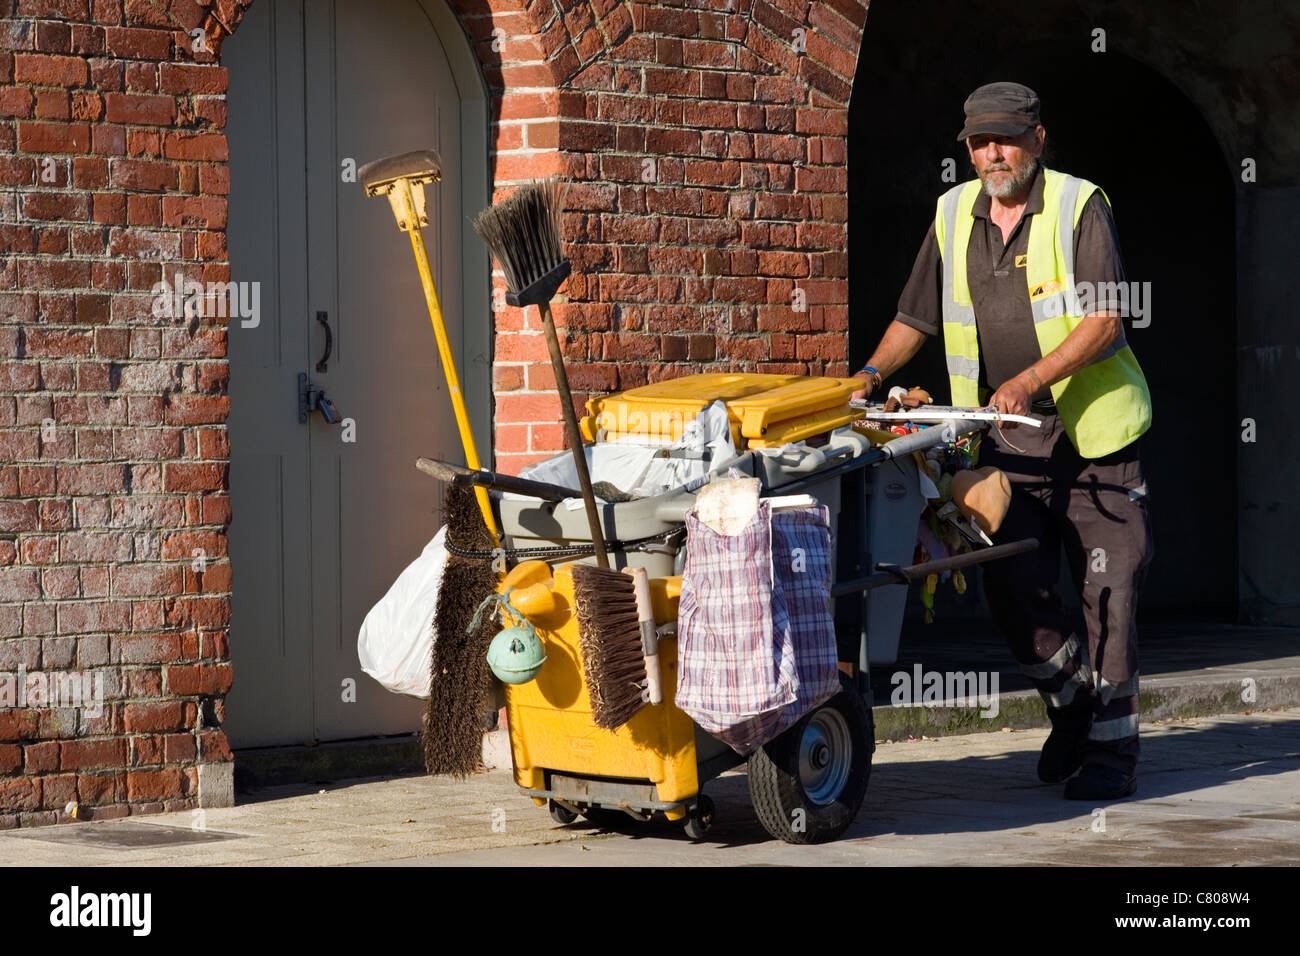 street cleaner pushing his cart in the early morning Stock Photo